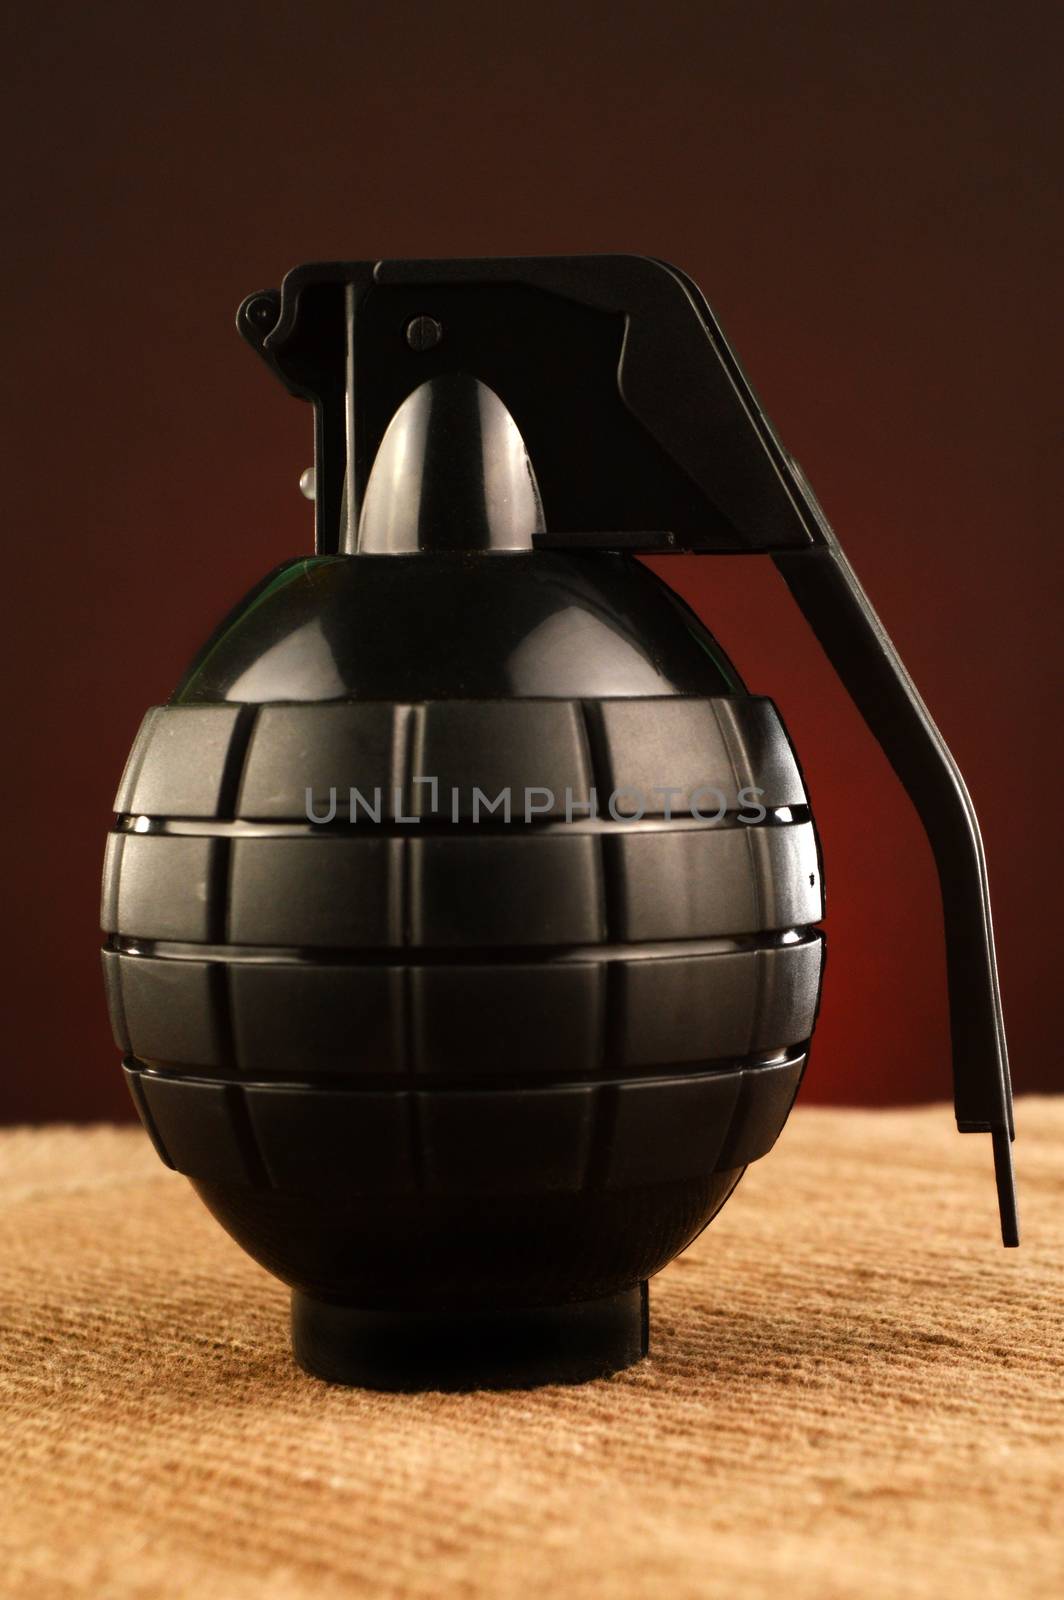 A new fully loaded hand grenade ready for military combat.